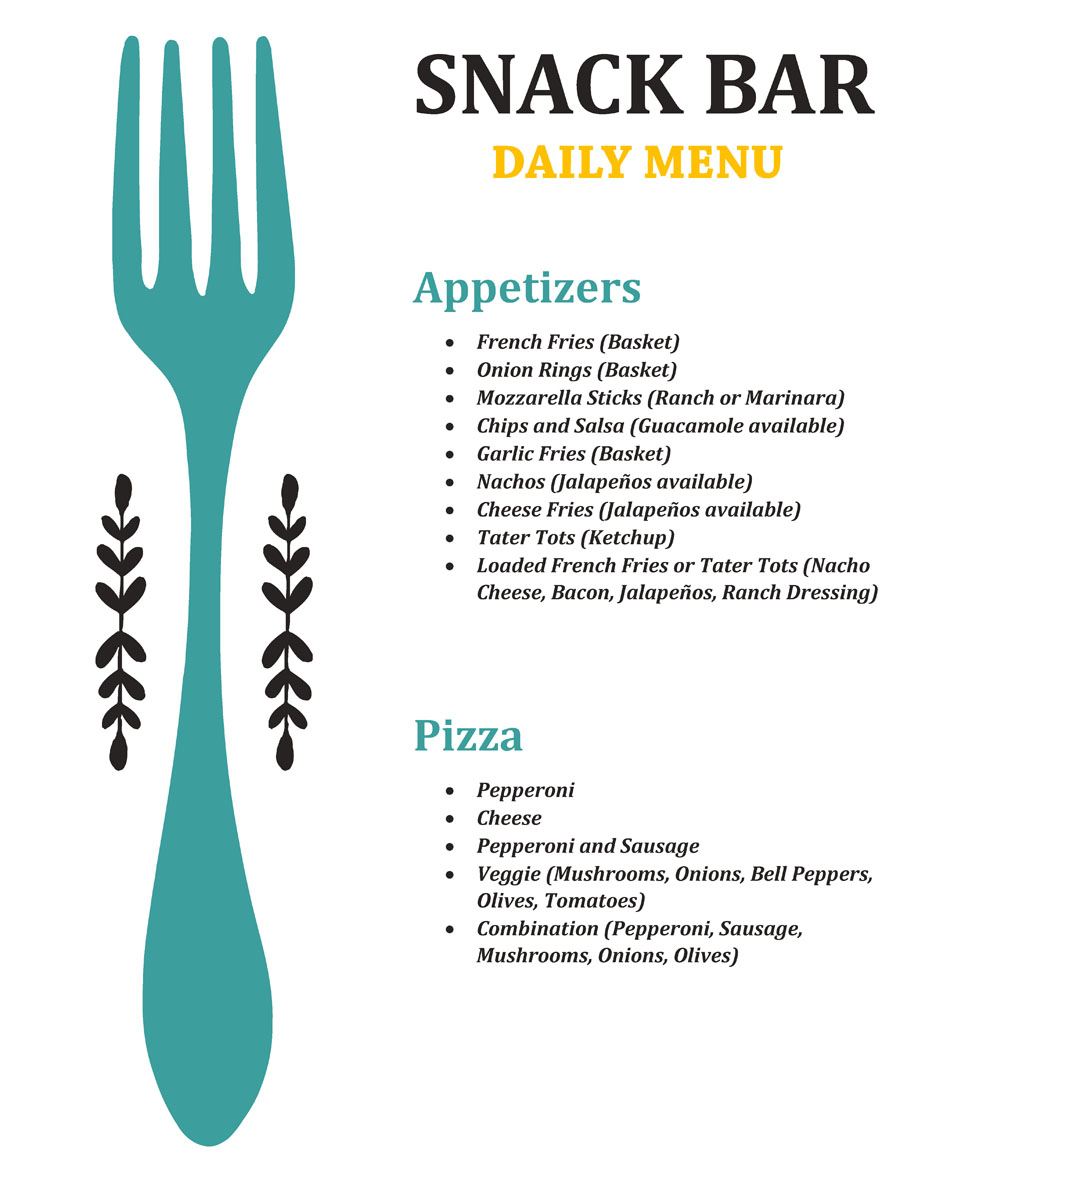 Snack Bar Menu Appetizers and Pizza